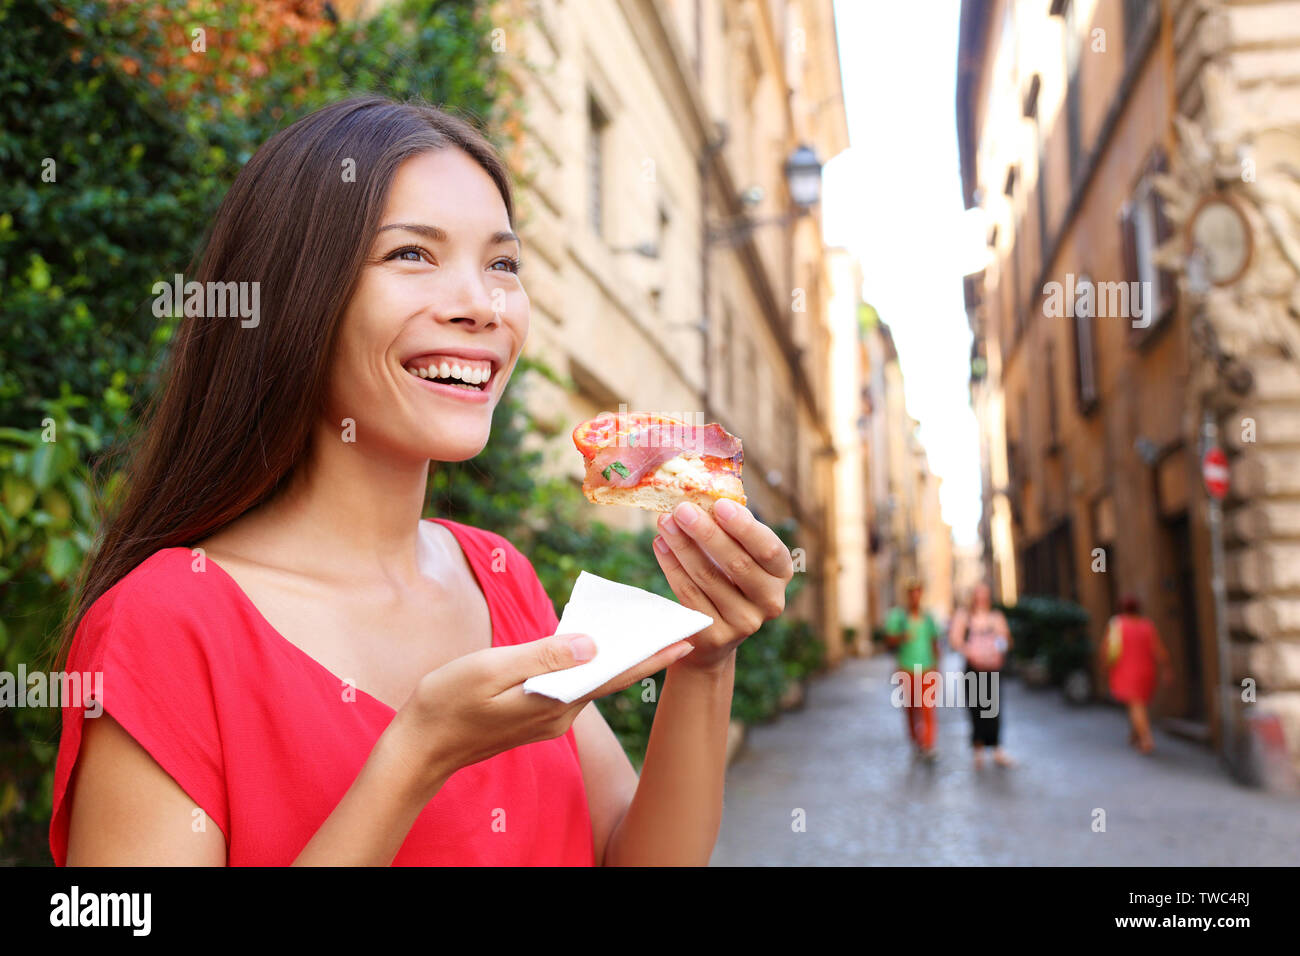 Pizza woman eating pizza slice in Rome, Italy smiling happy outdoors during travel vacation holiday. Beautiful mixed race Asian Caucasian woman enjoying Italian food. Stock Photo